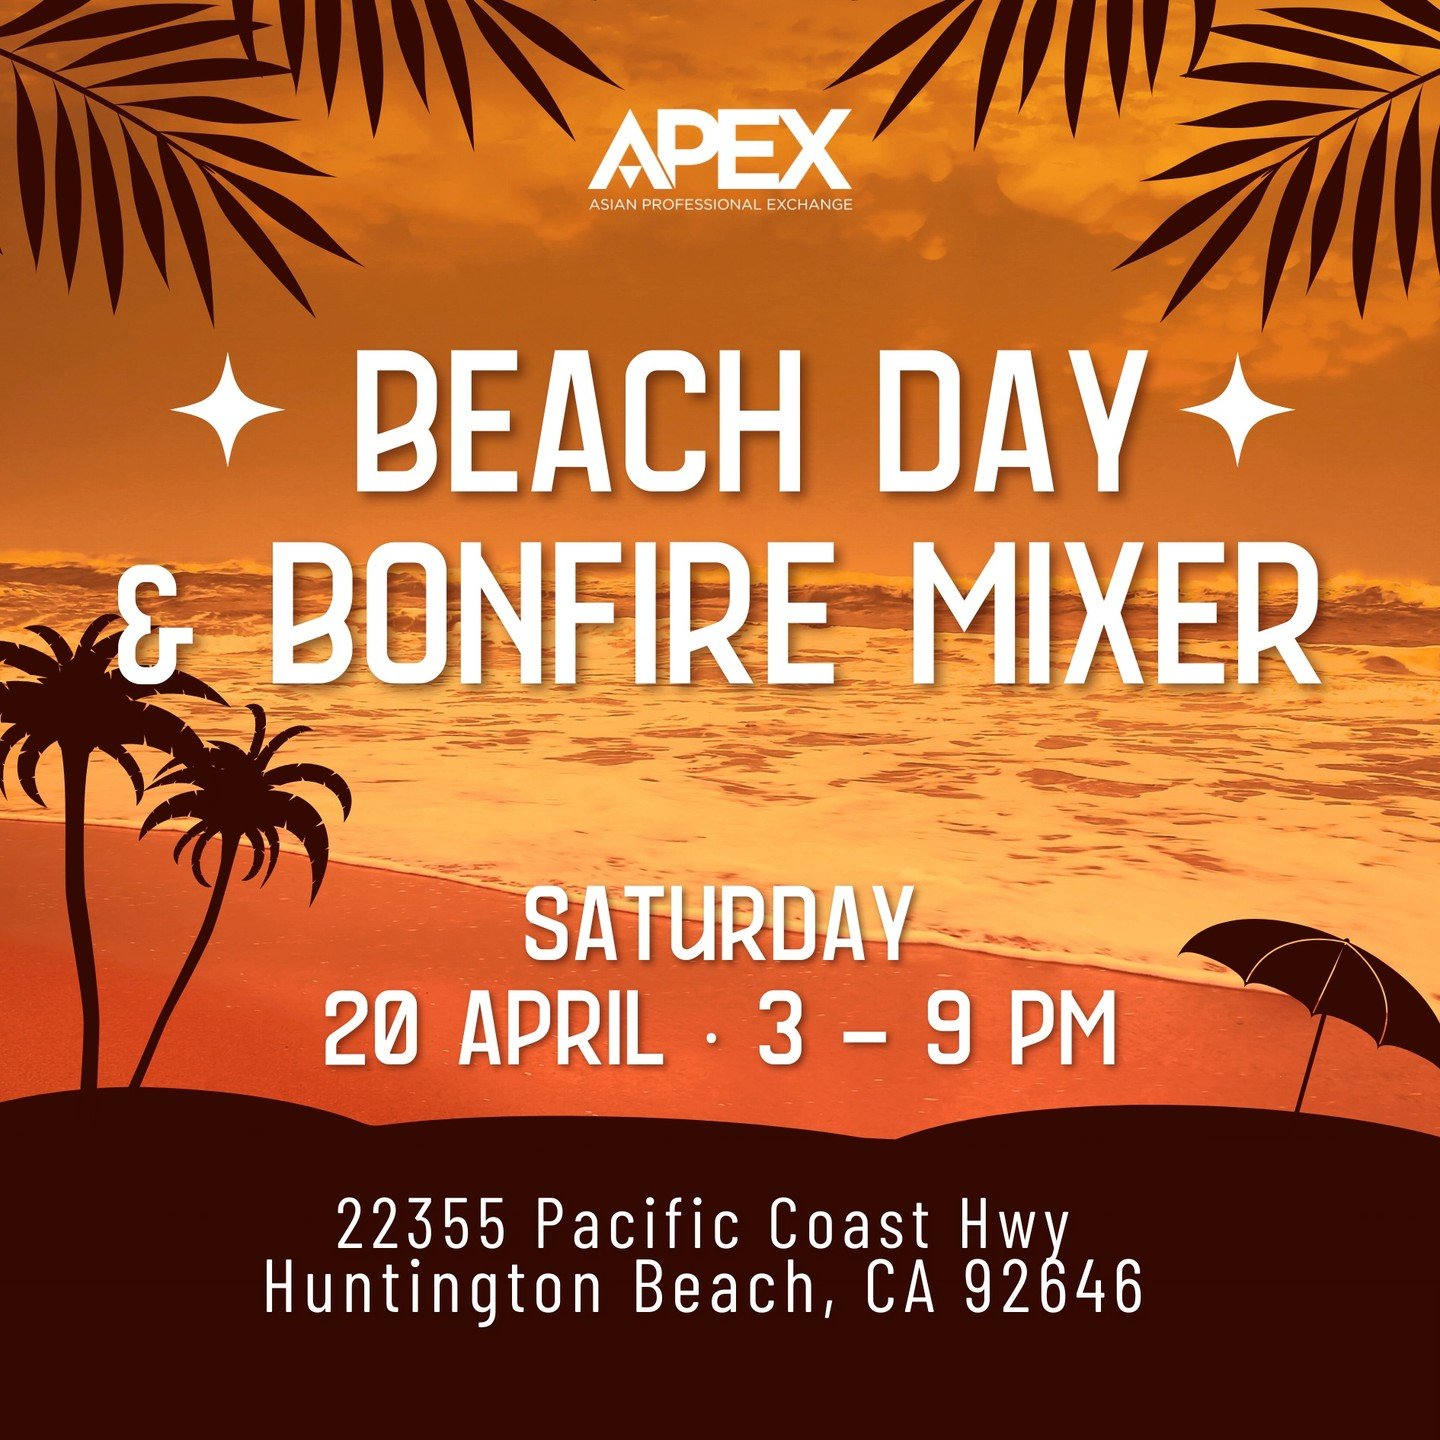 Join us at Apex for a Beach Day and Bonfire Mixer! 

Enjoy the beautiful beachfront firepit, picnic area, and an assortment of light food, snacks, and beverages including cookies, chocolates, and soft drinks. 

You can buy a $5 ticket and bring a fri